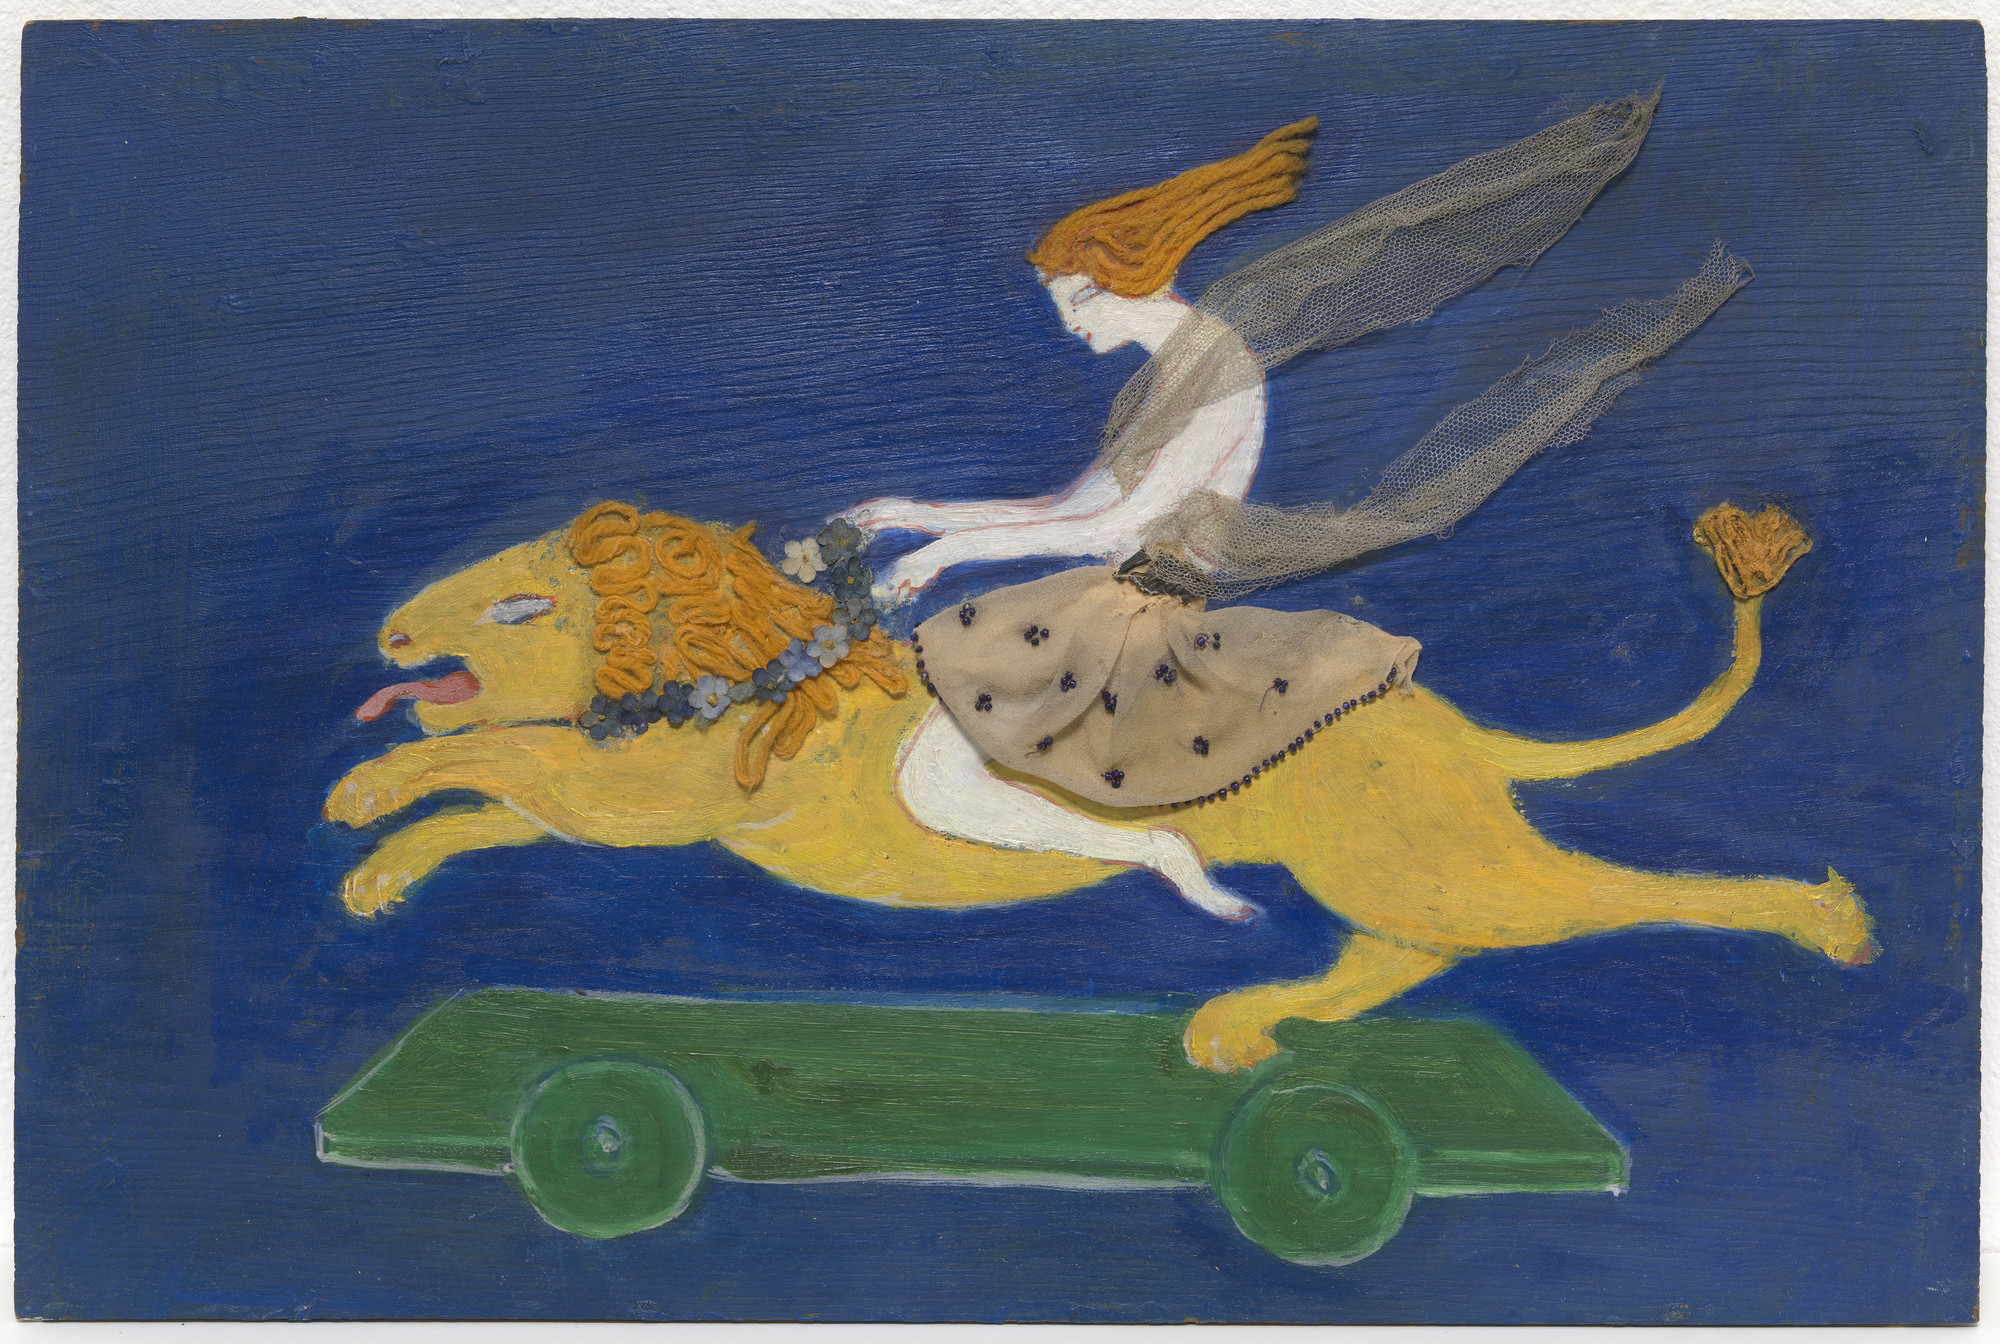 Costume design (Androcles and the Lion) by Florine Stettheimer - c. 1912 - 30.2 x 45.4 cm Museum of Modern Art